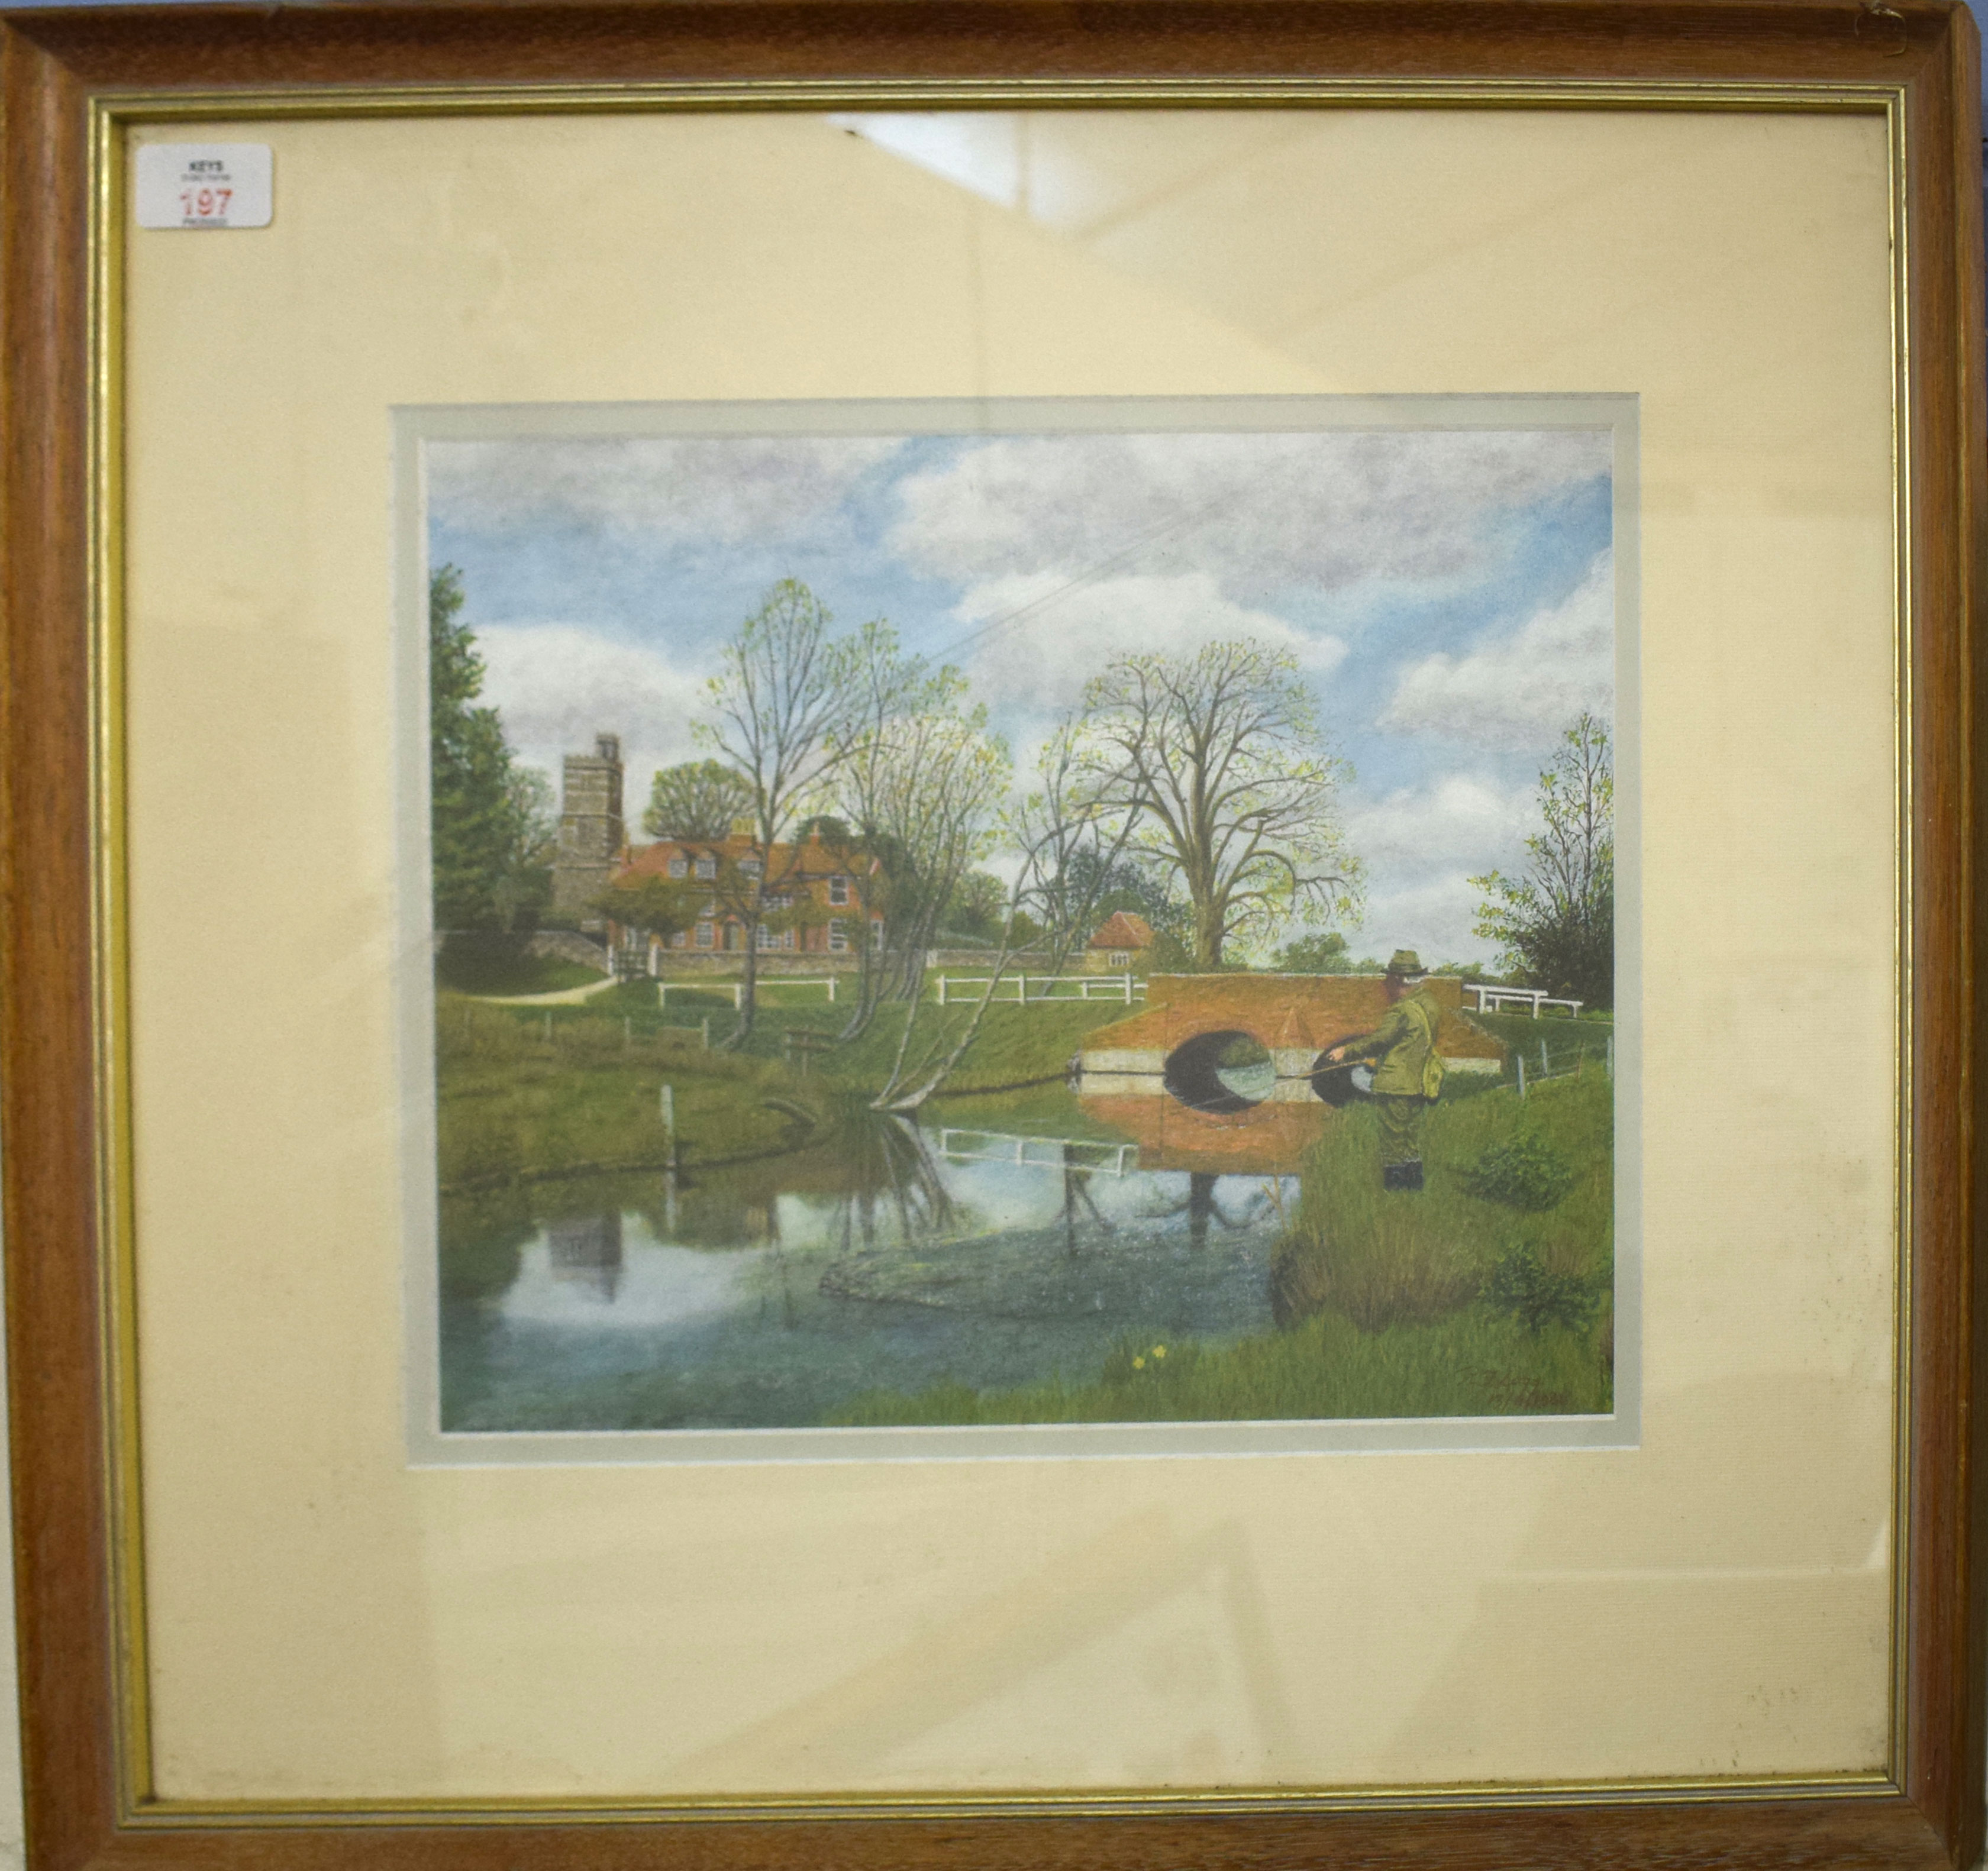 R F LUGG (20TH CENTURY), "River Avon, Hants",watercolour, signed and dated 1981 lower right